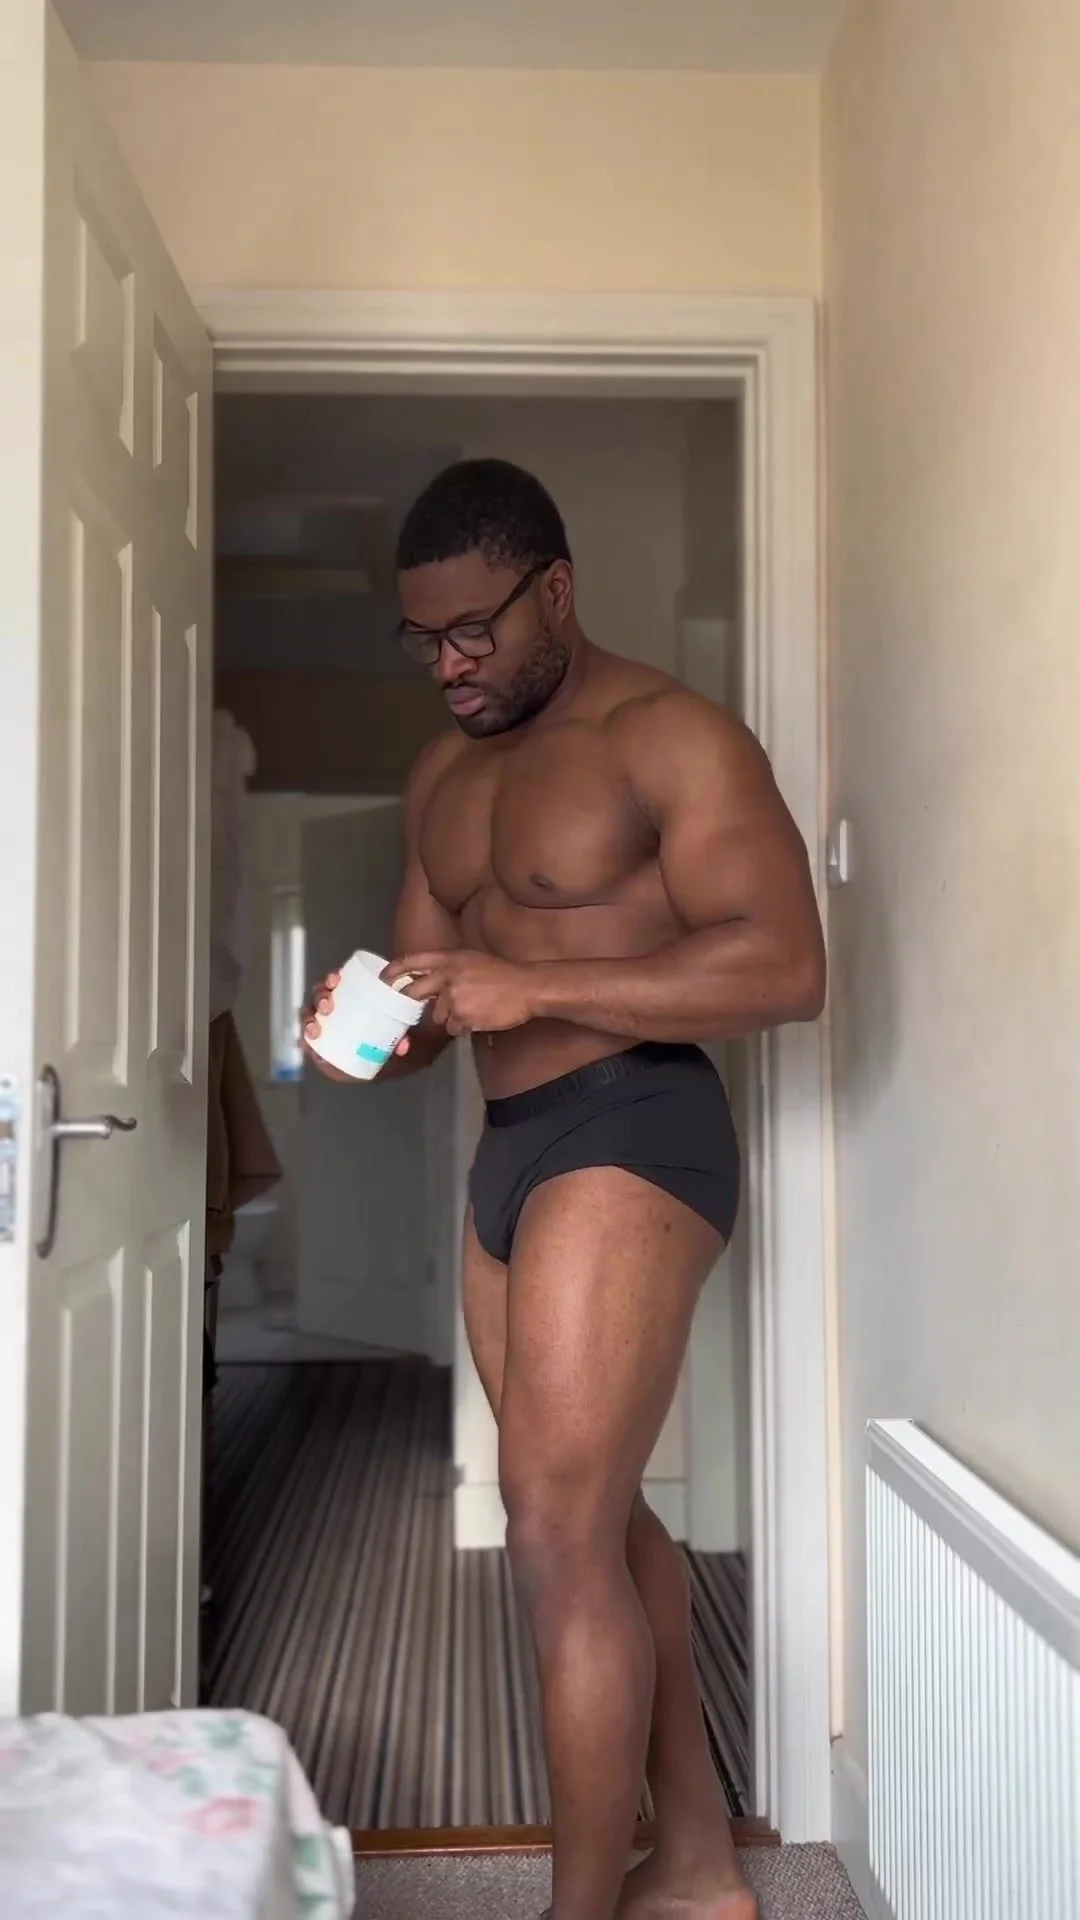 Sexy man gets ready for the day - ThisVid.com